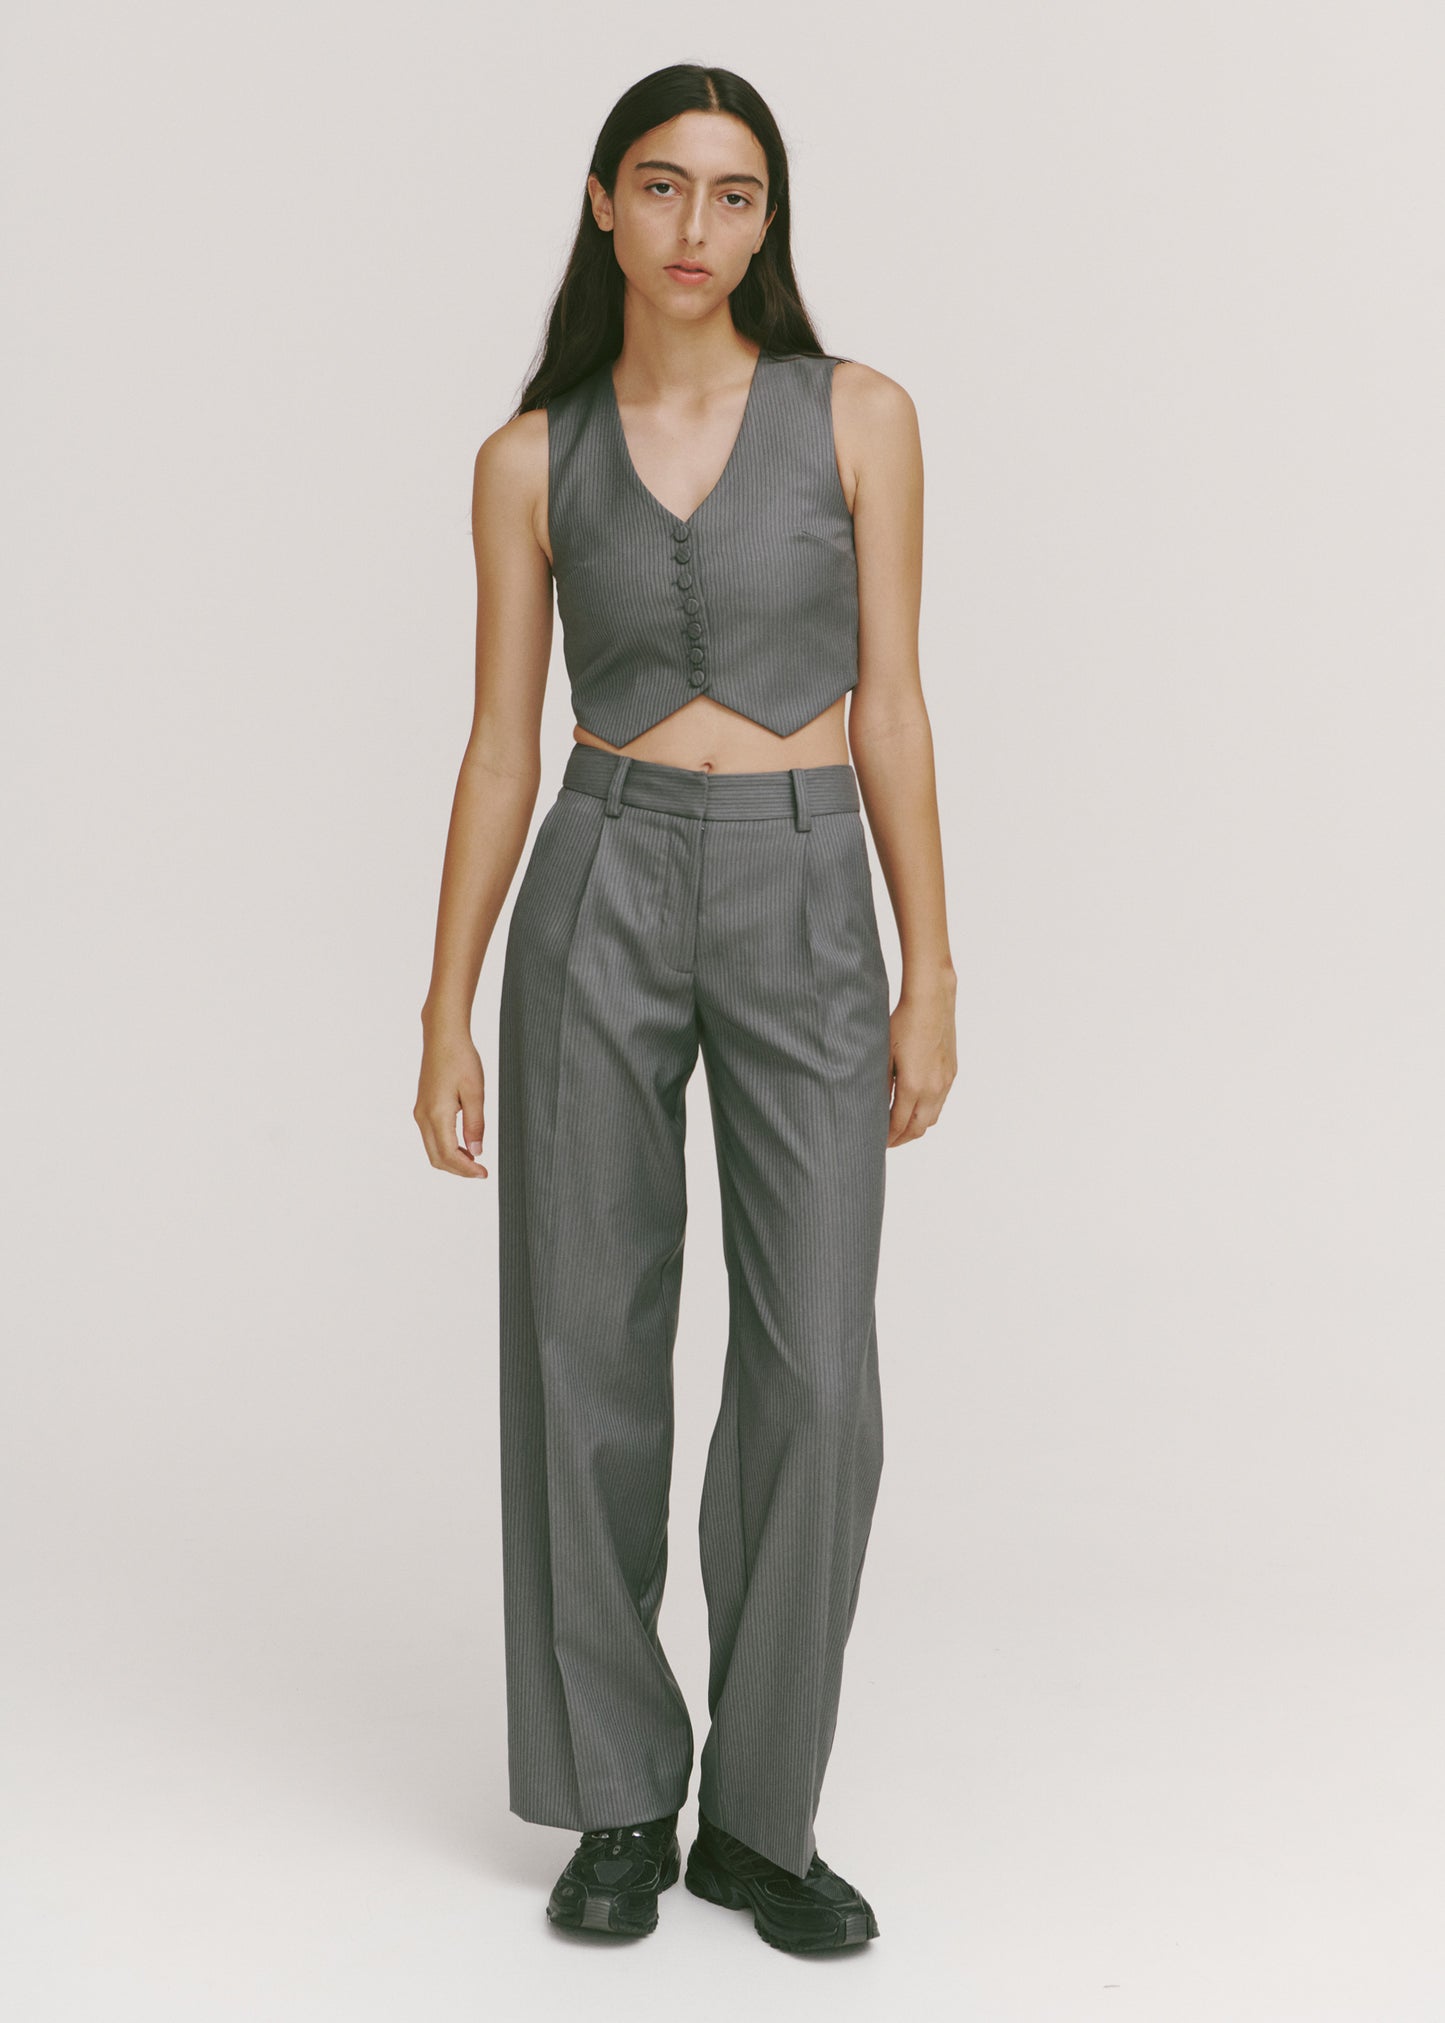 All-Day Trousers in Grey Pinstripe